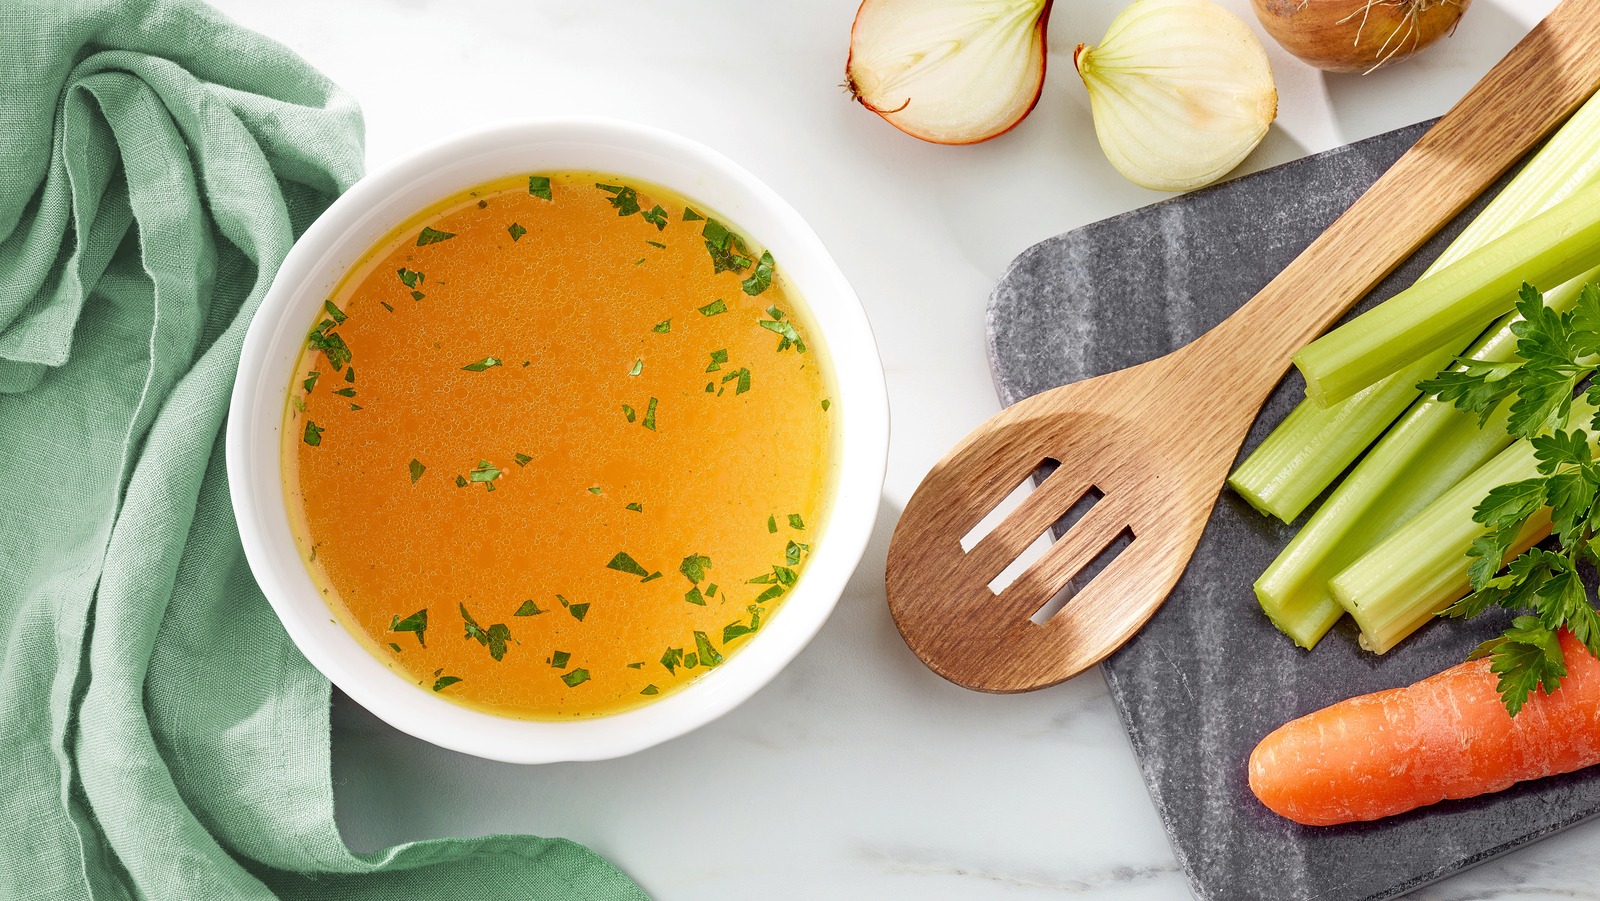 How Much Lead Is in Organic Chicken Soup (Bone Broth)?